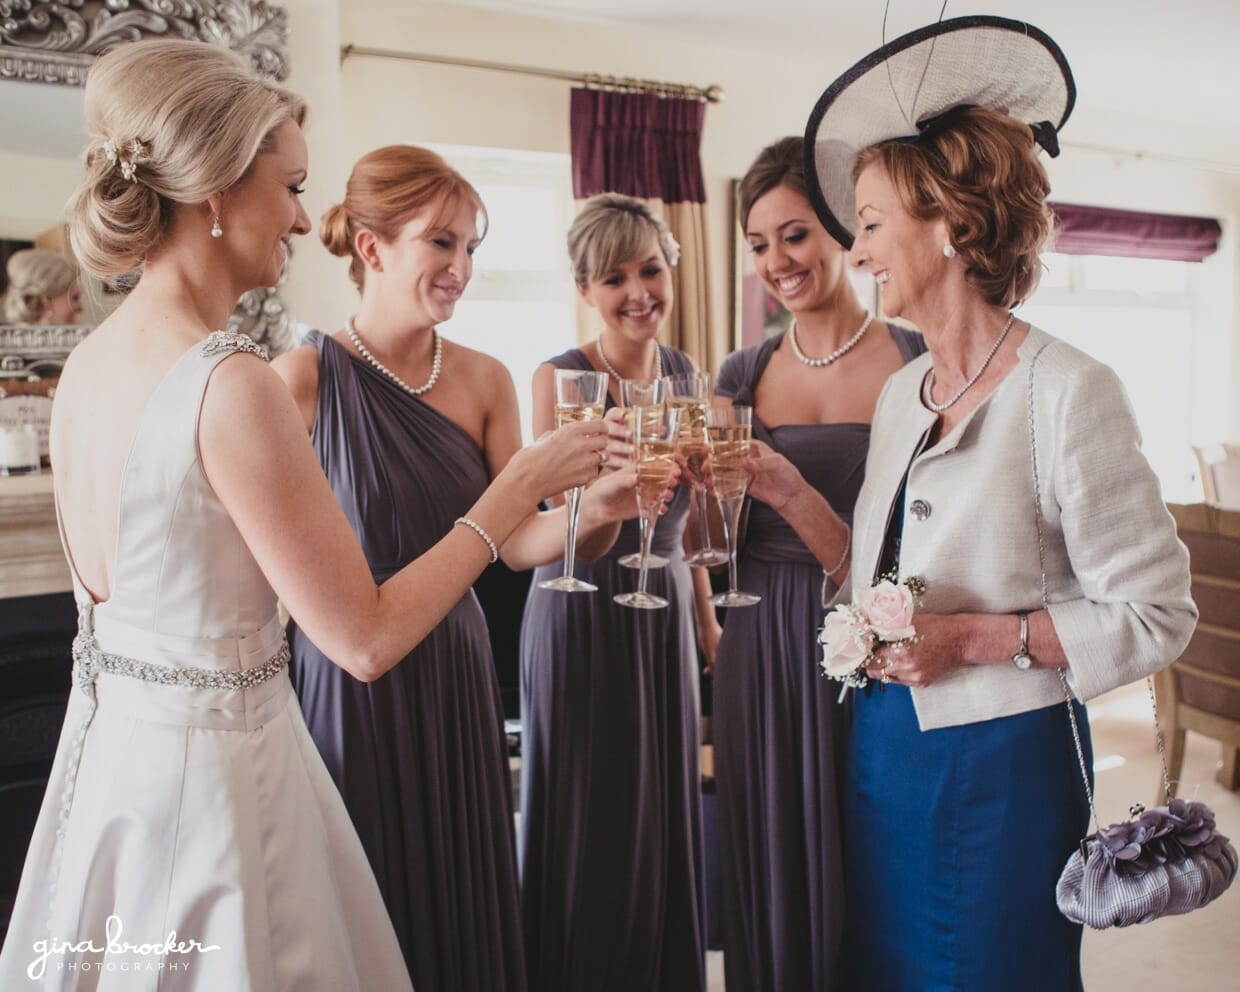 A bride shares a champagne toast with her bridesmaids and mother on the morning of her classic garden wedding